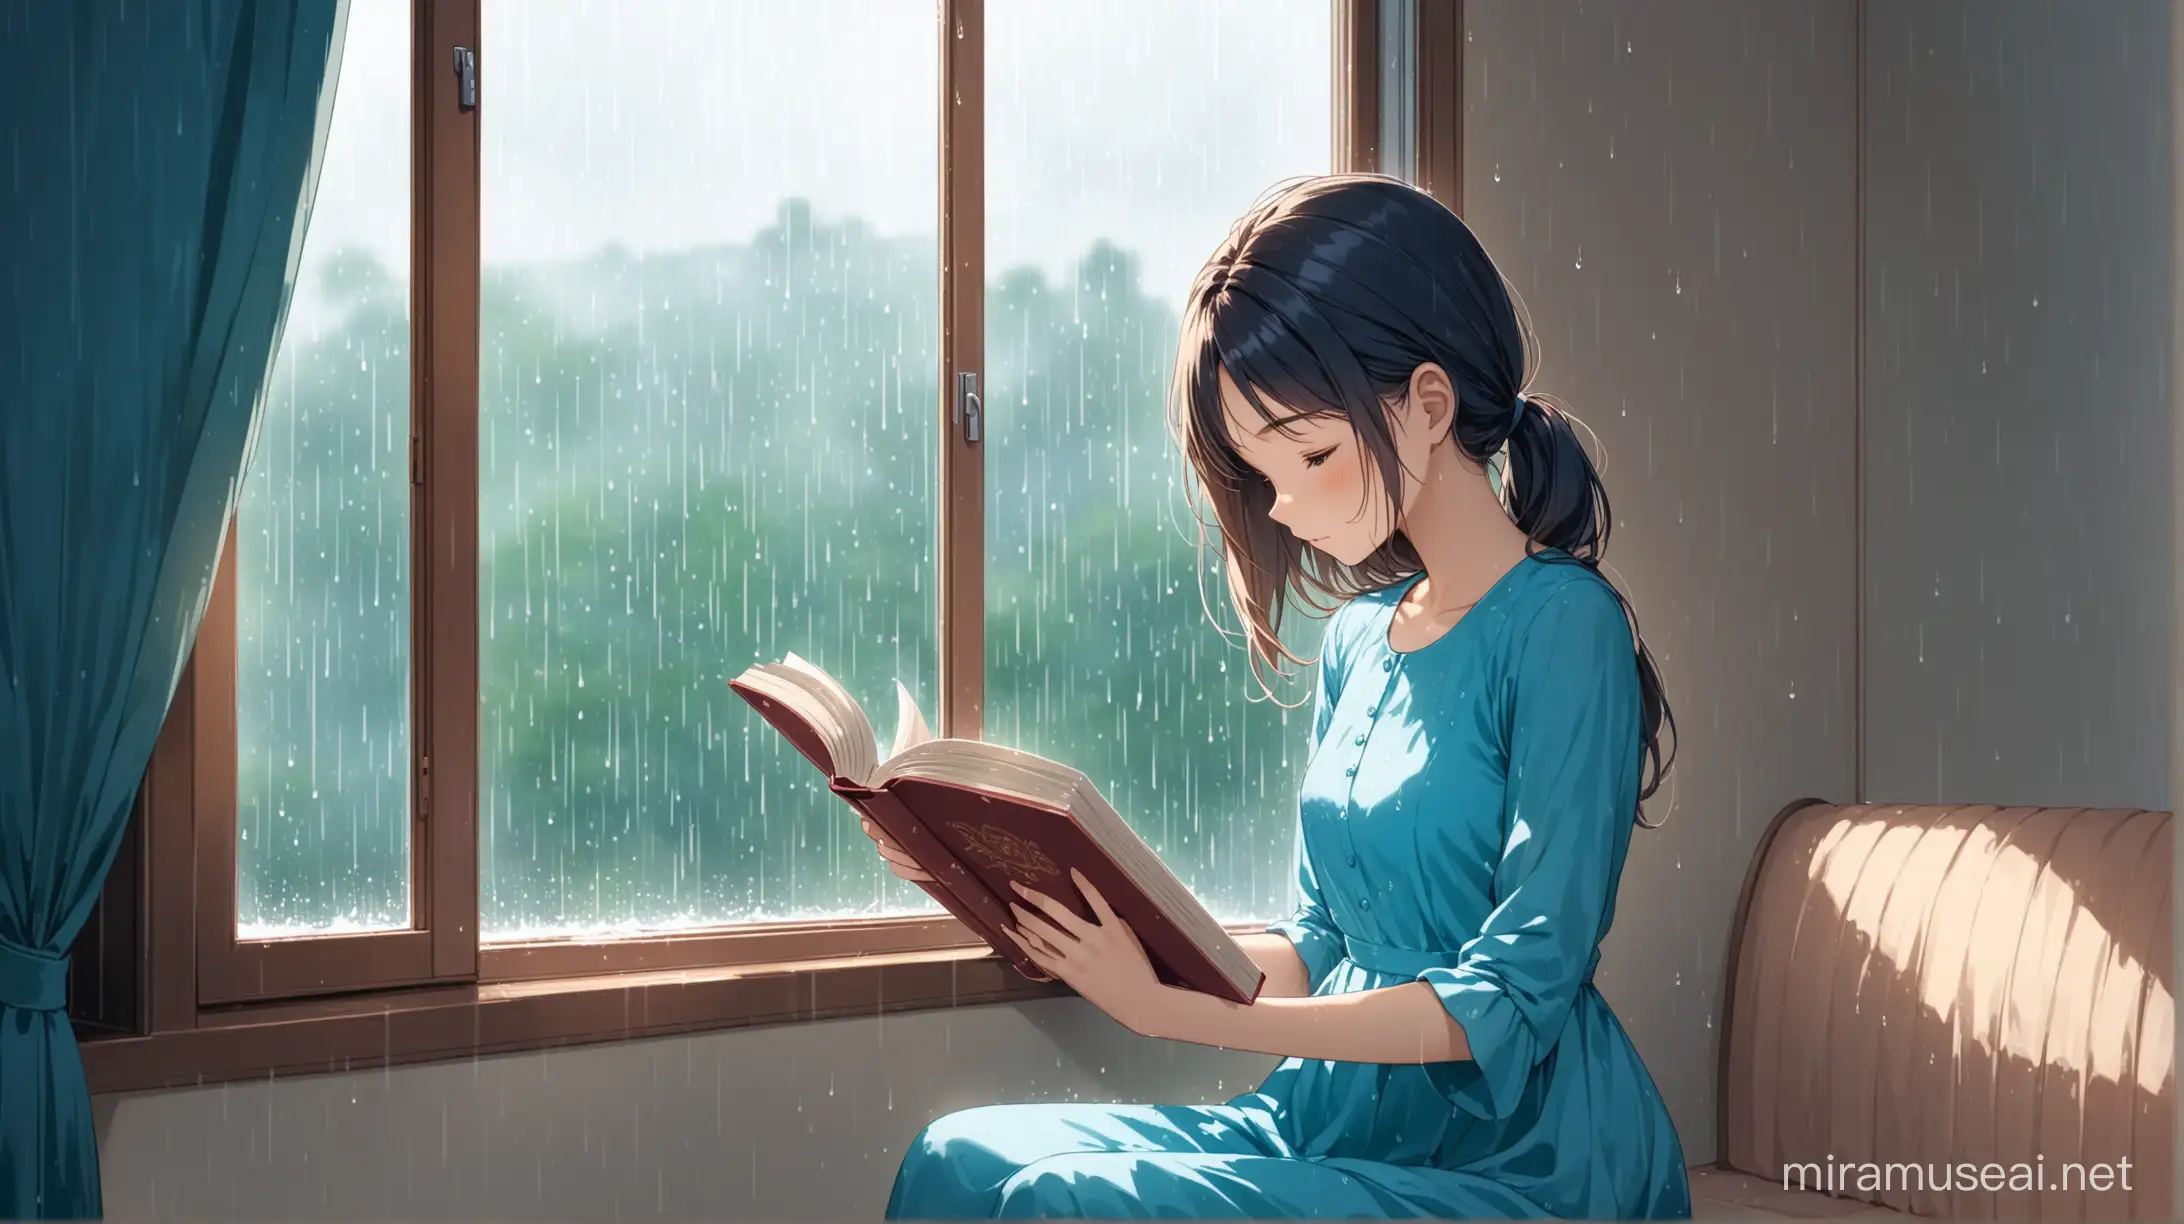 A girl sitting by the window is reading a book, wearing a blue dress, and it is raining outside